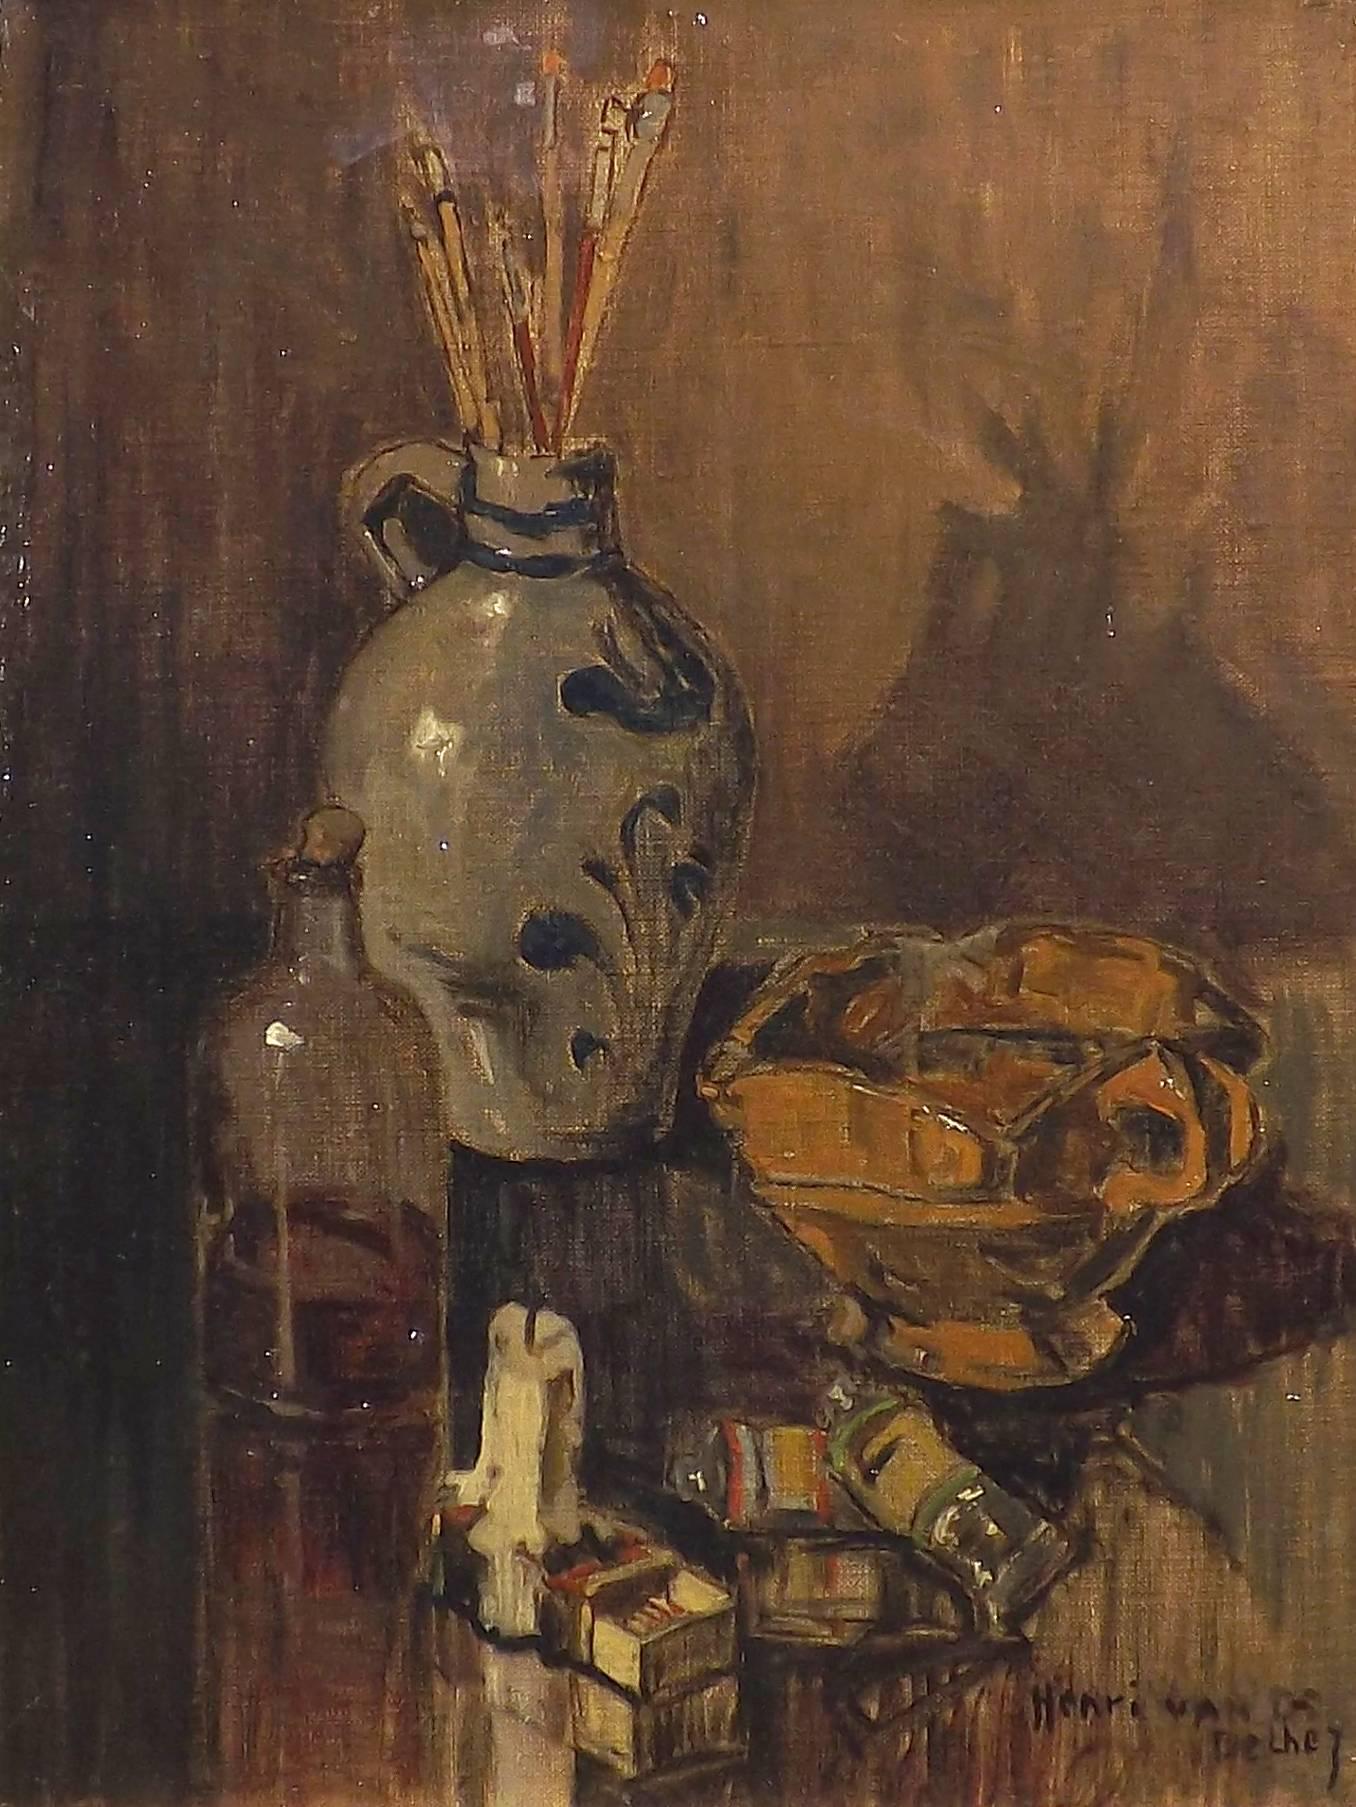 A masterfully painted collection of painter's tools and supplies painted by the Dutch artist Henri Van Os-Delhez. Some tubes of paints lie on a table in front of a bowl with which to clean brushes. These brushes are kept in a earthenware jug in the